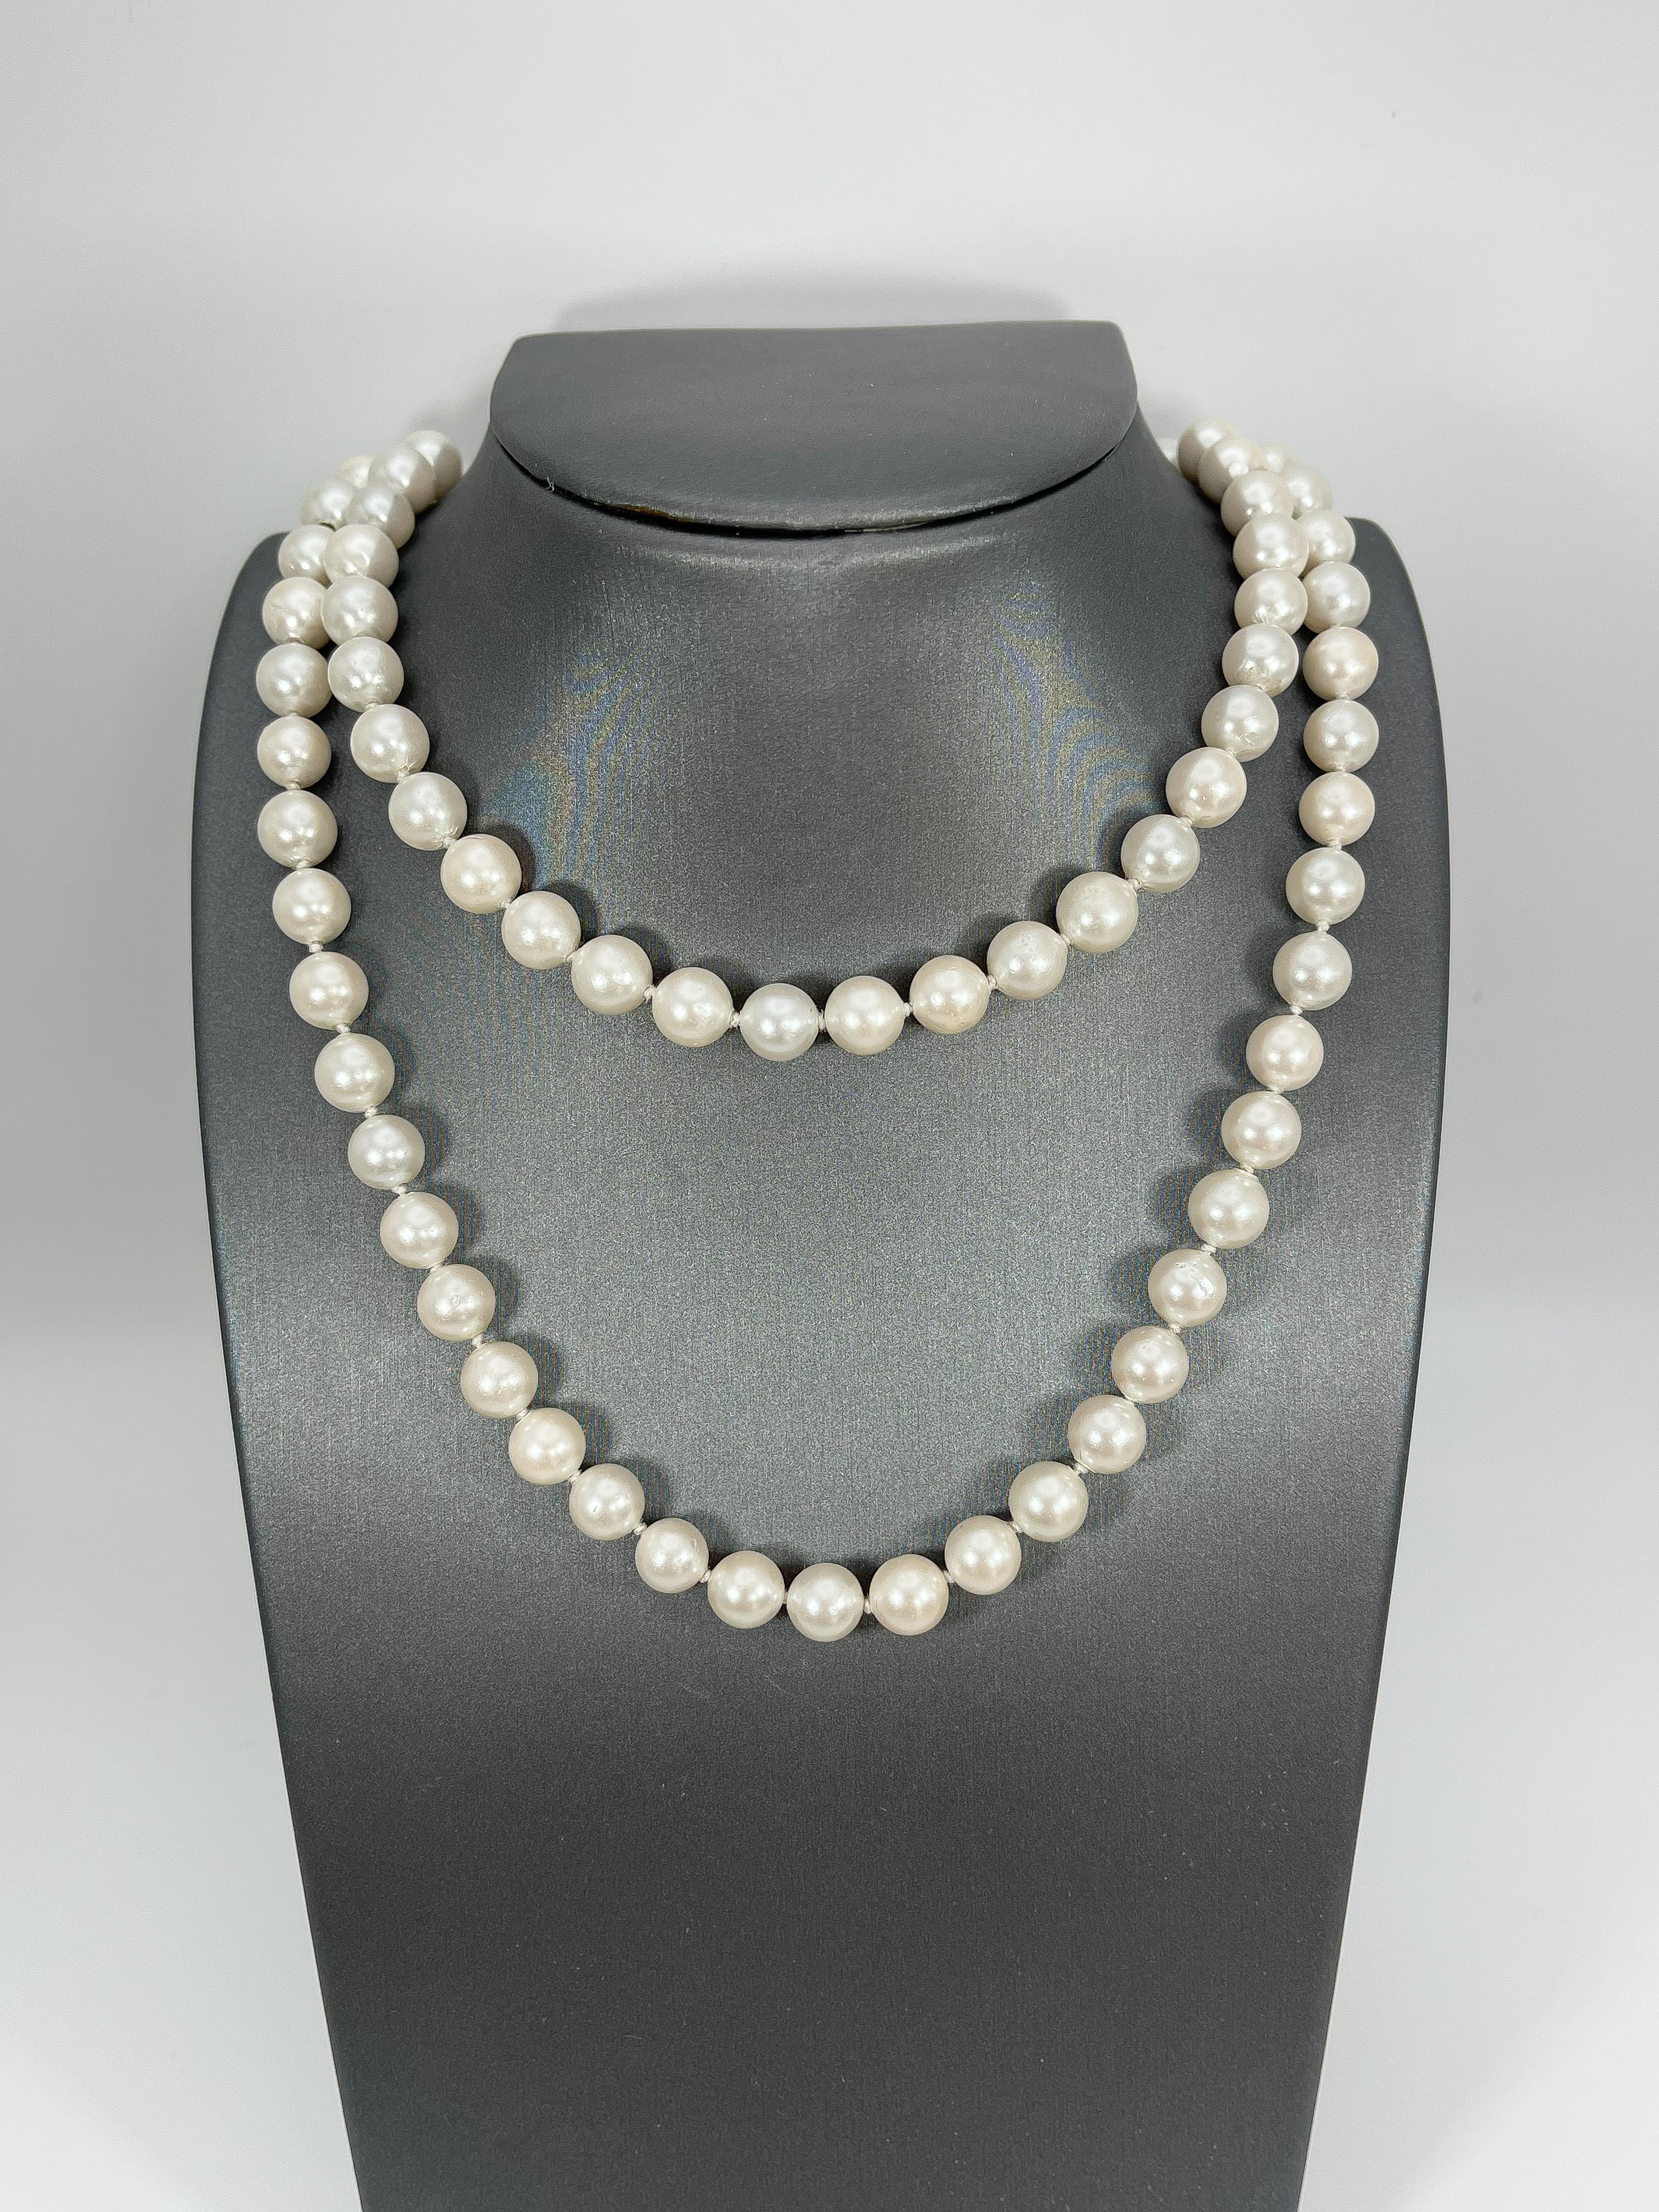 Opera length white akoya pearl necklace. The length of this necklace is 30 inches, the width is 8-8.5 mm, and it has a total weight of 70.6 grams.